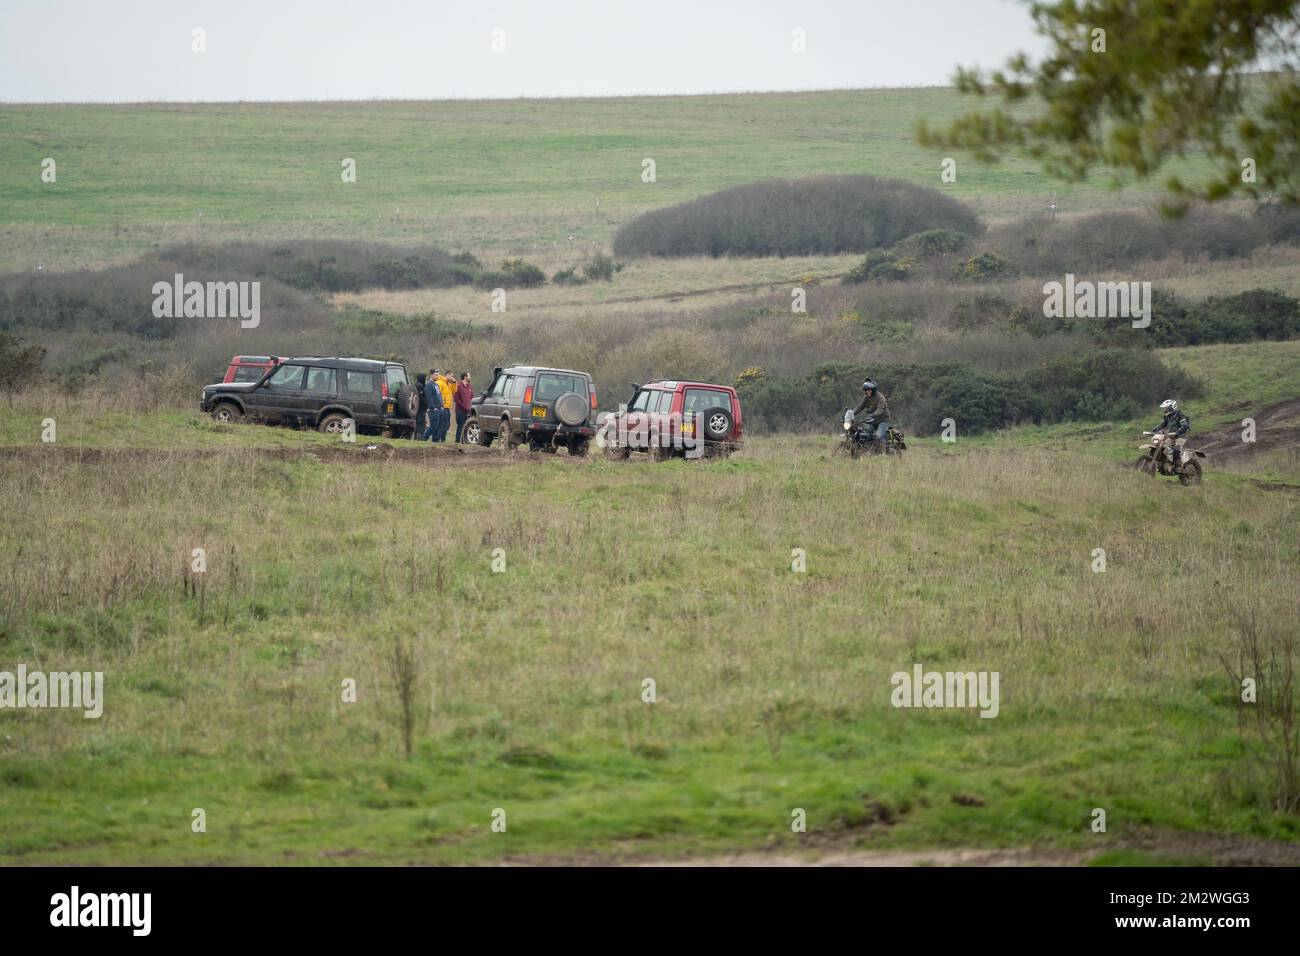 a group of land rover discovery 4x4 off-road vehicles being driven through deep water and mud in open countryside, Wiltshire UK Stock Photo